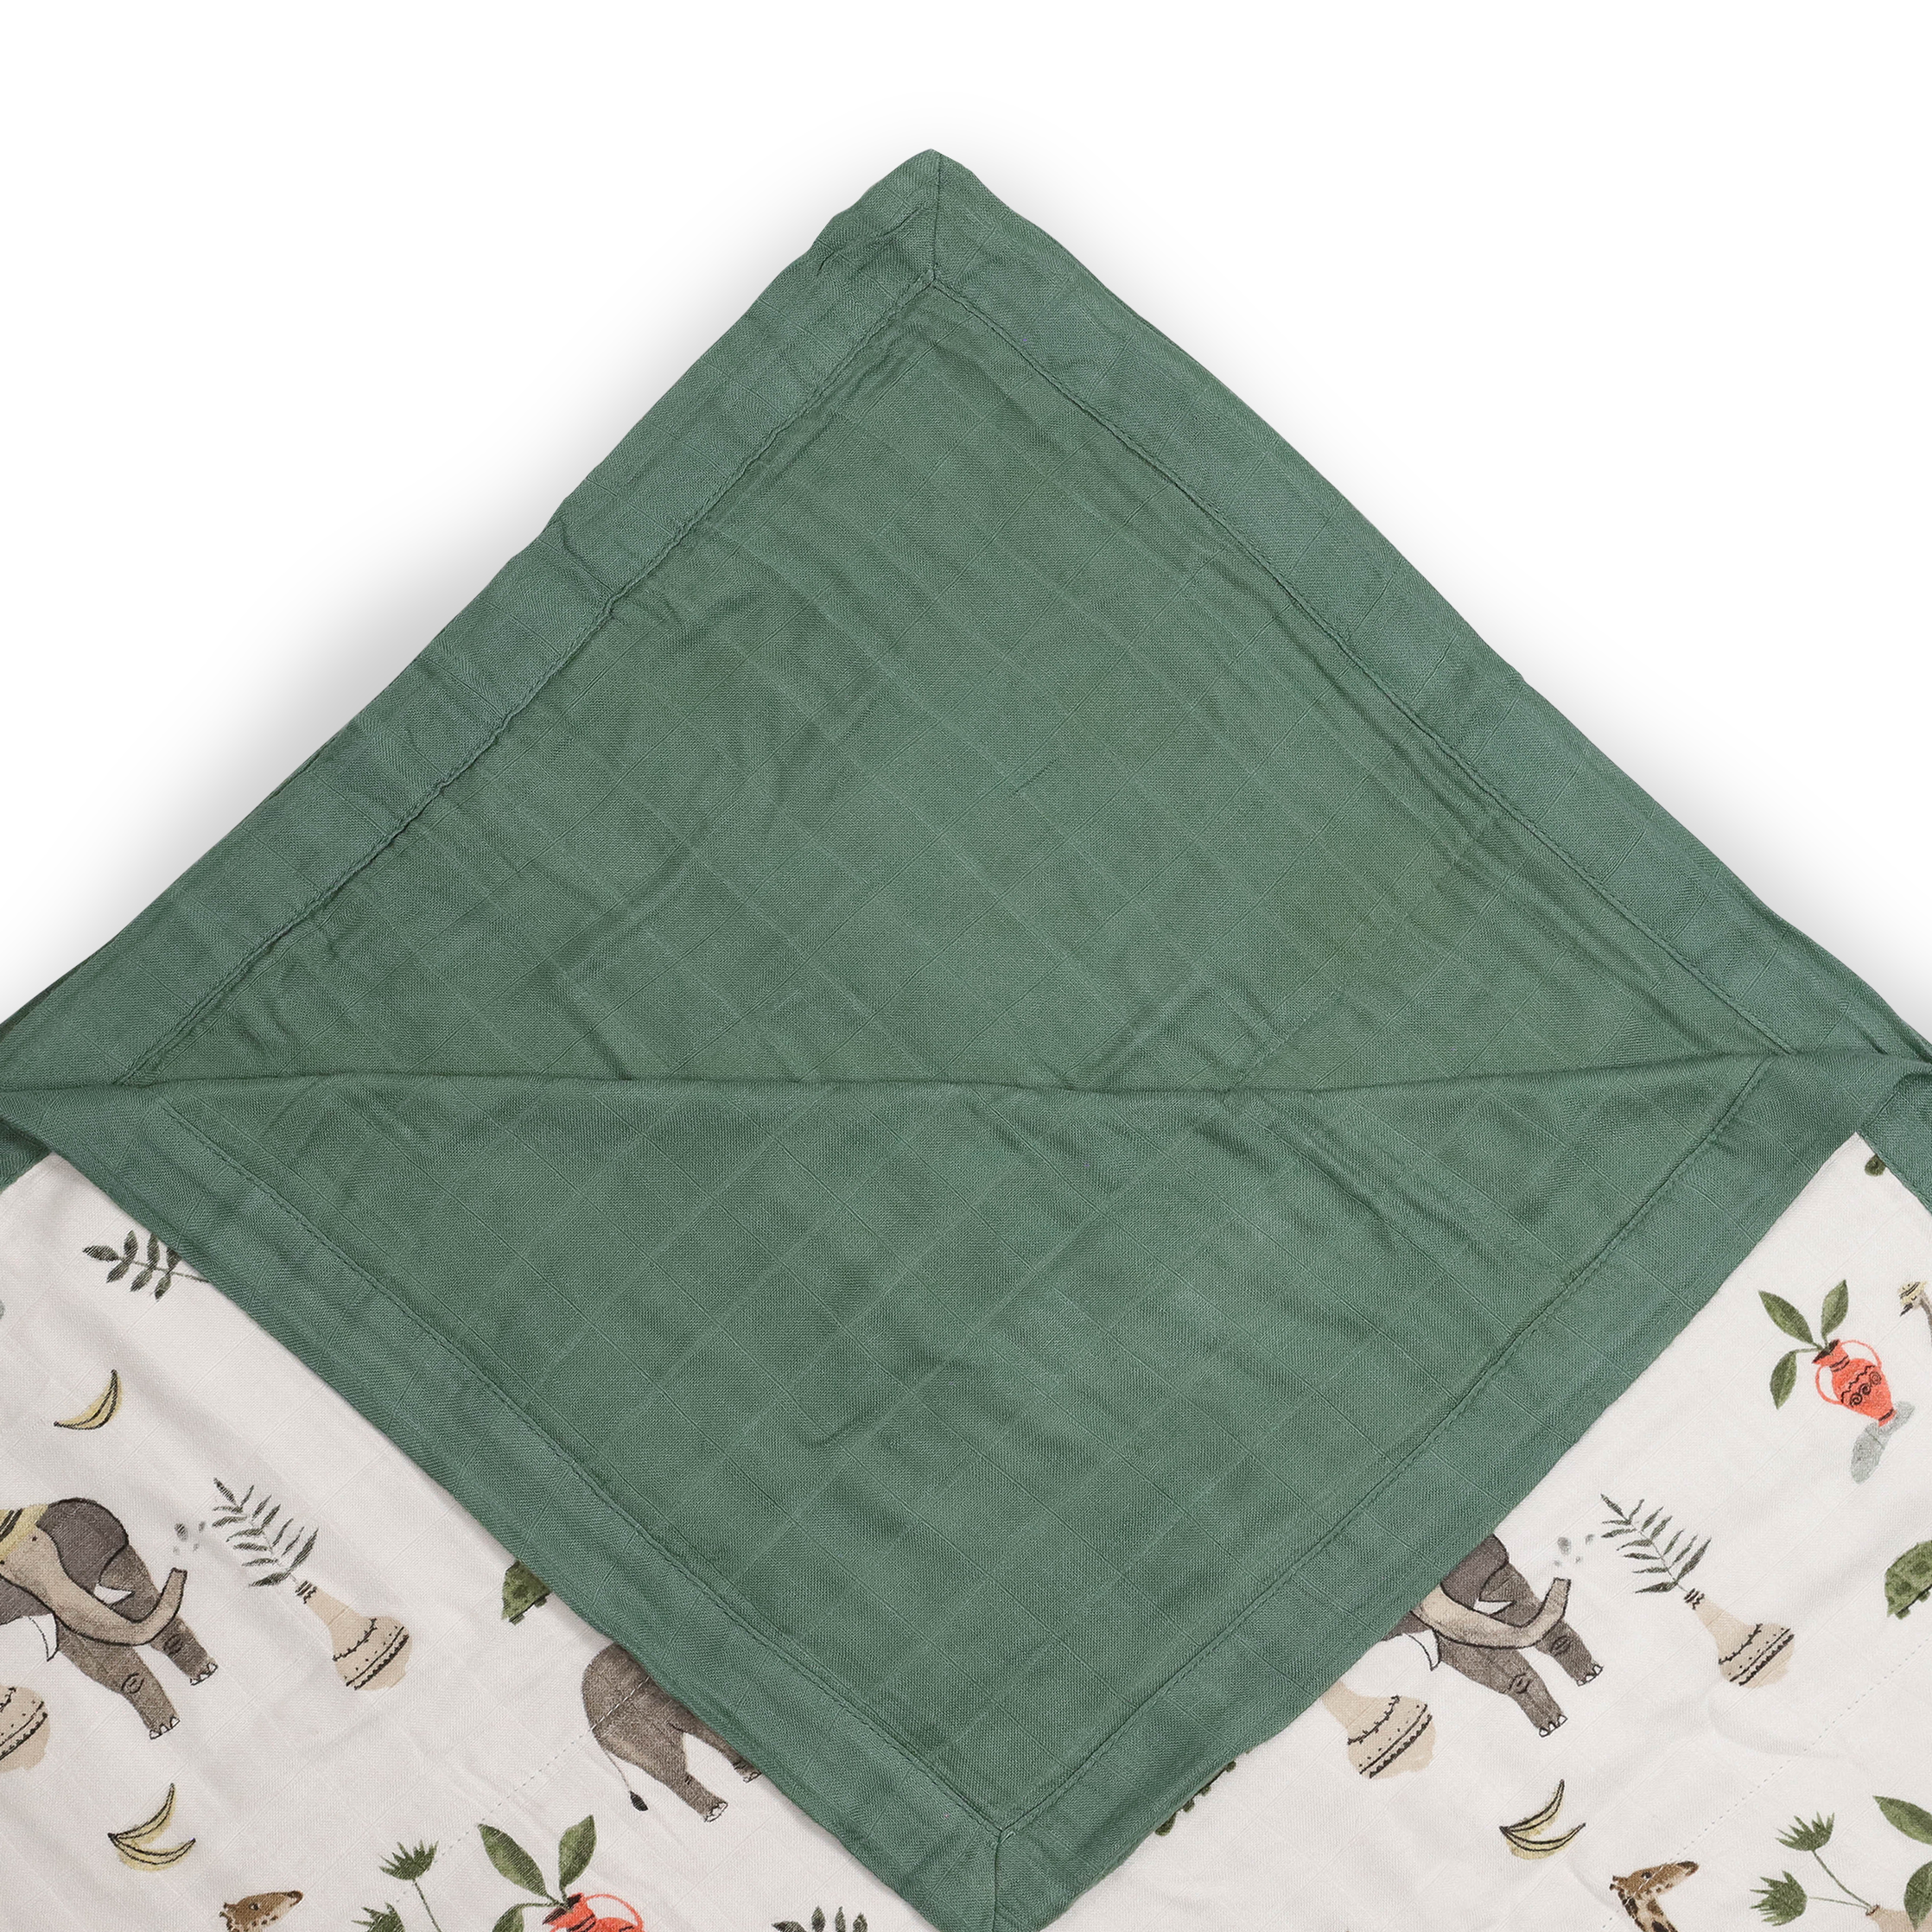 Deluxe Muslin Quilted Throw - Safari Social 2